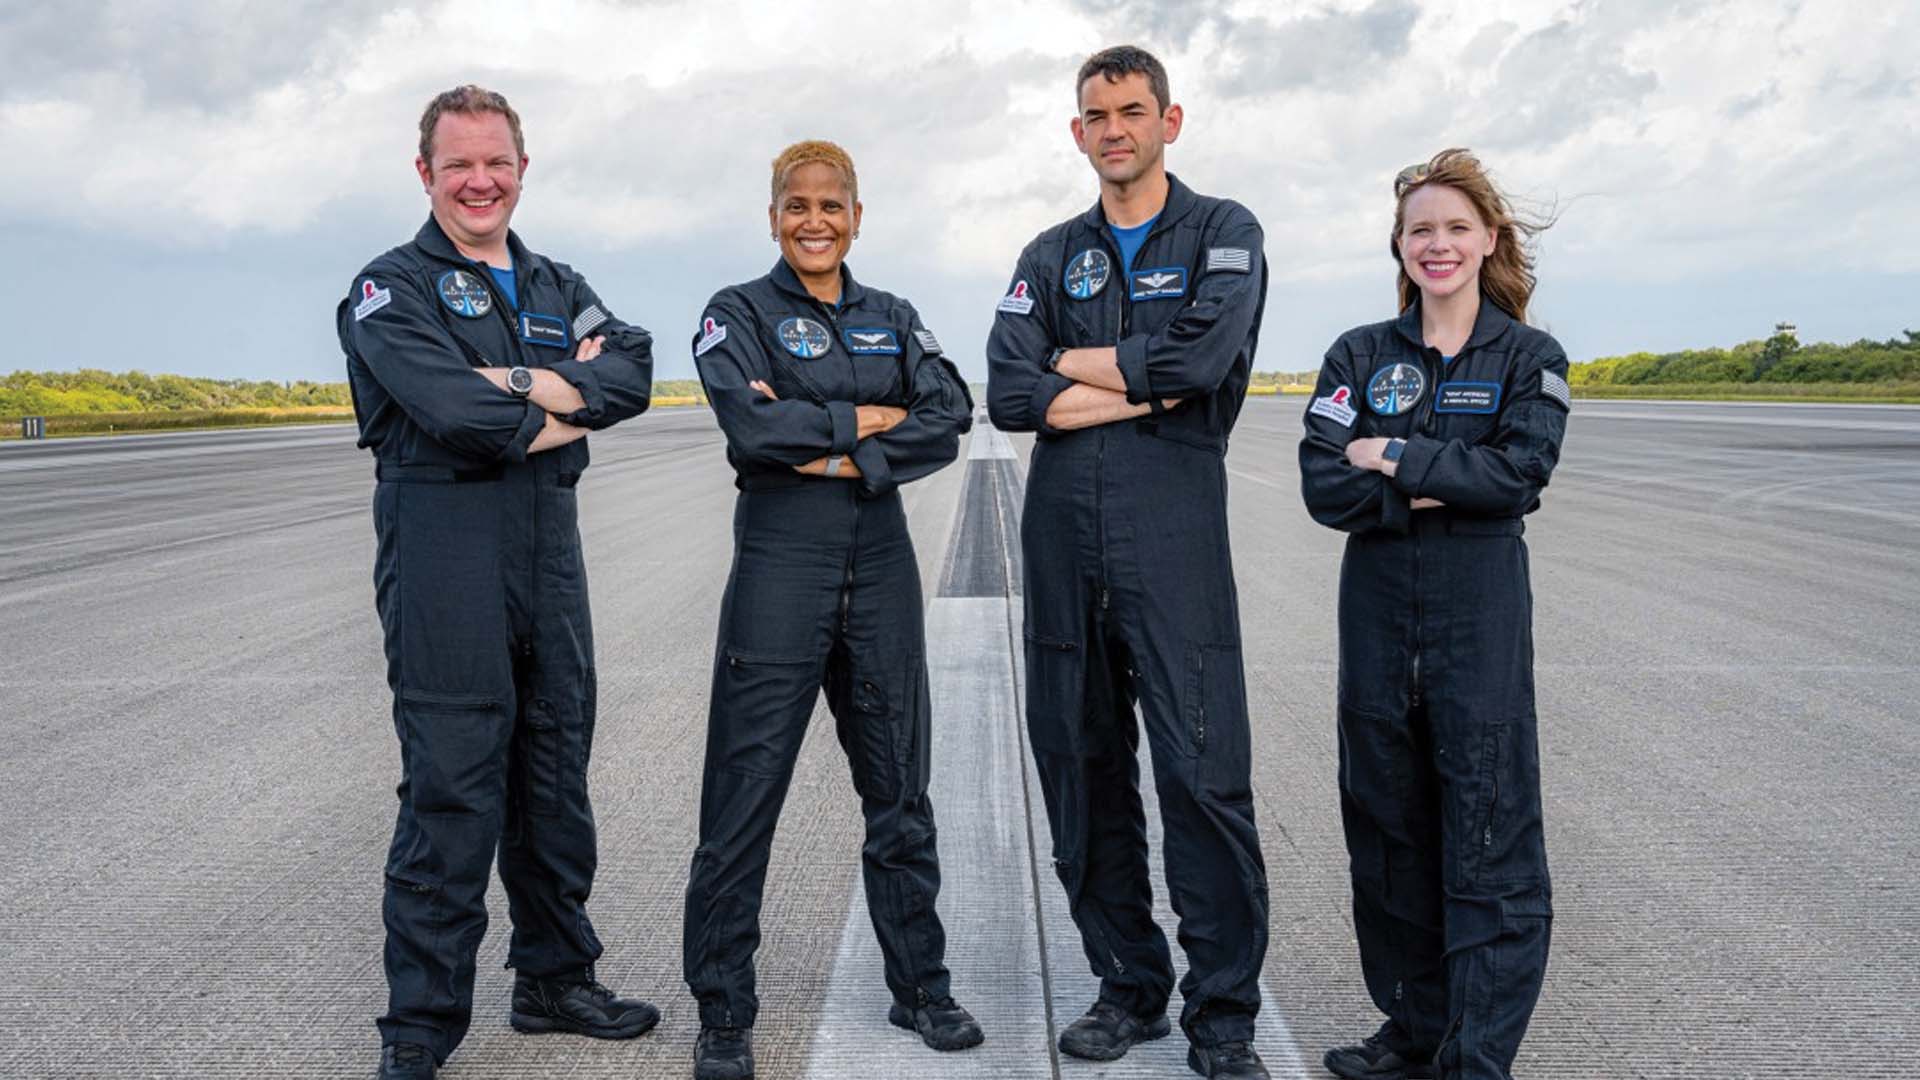 The civilian crew of SpaceX's Inspiration4